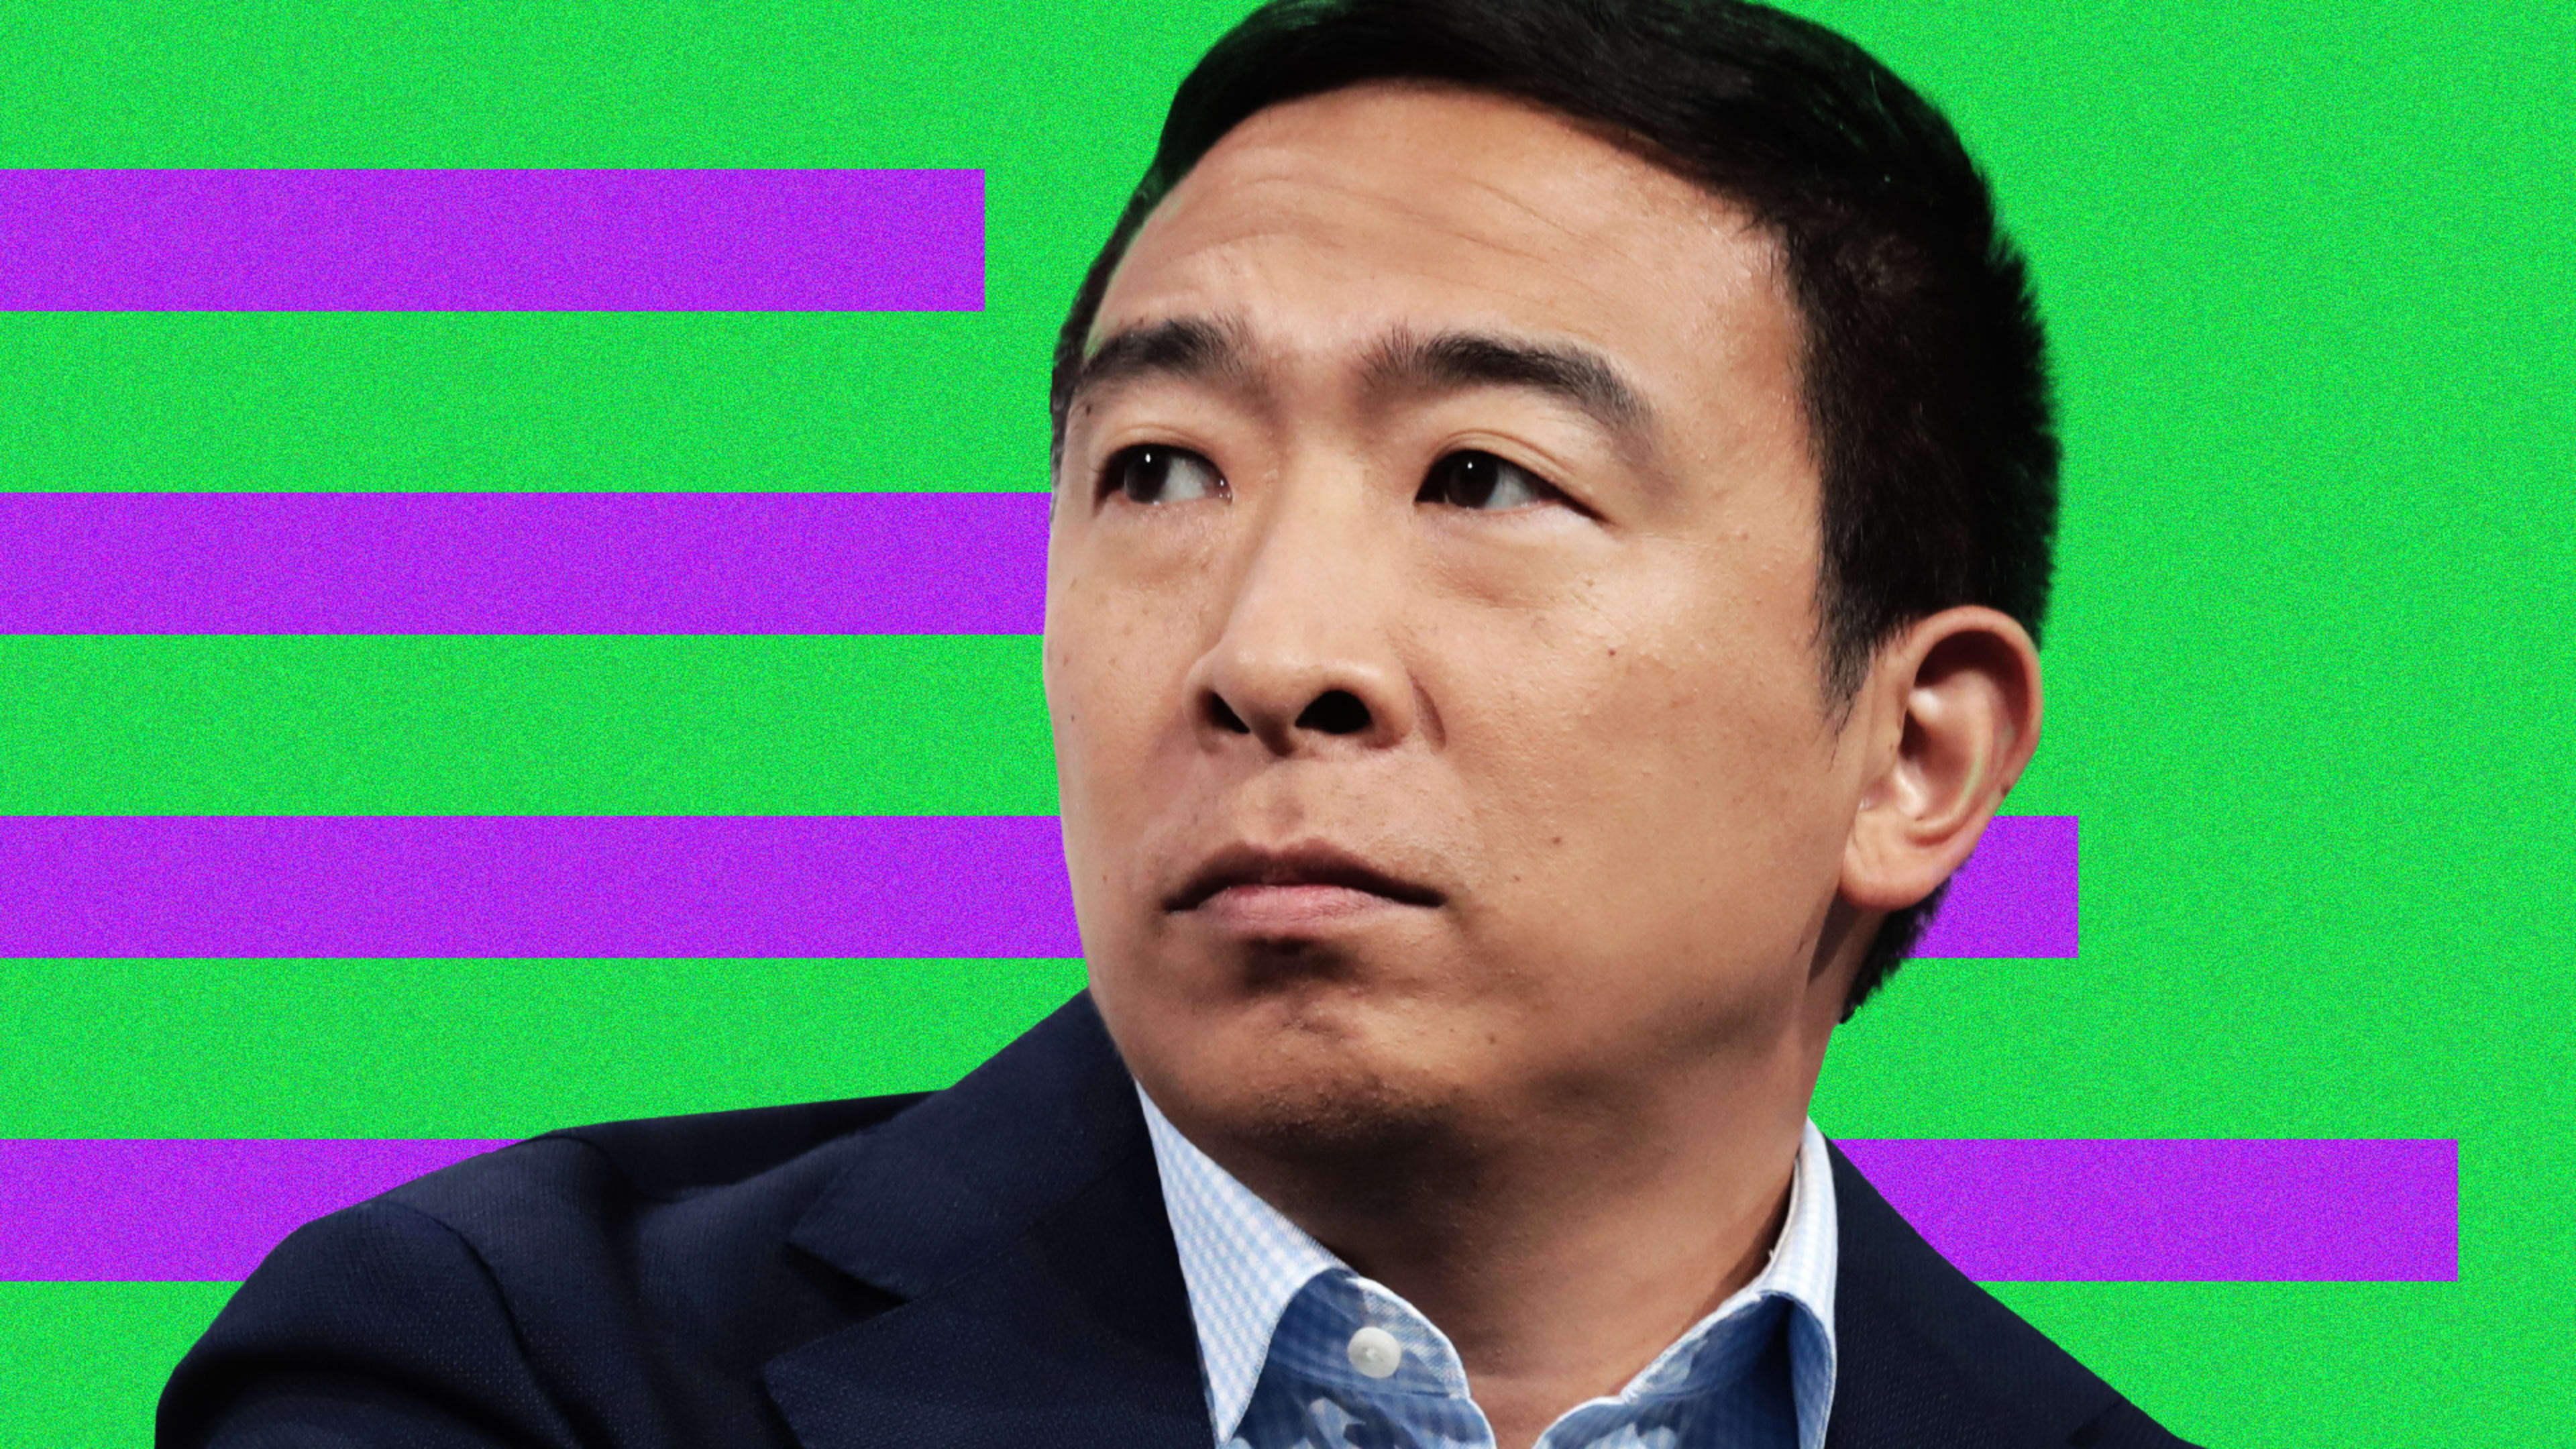 Math-obsessed Andrew Yang should be thrilled with these Twitter hashtag numbers